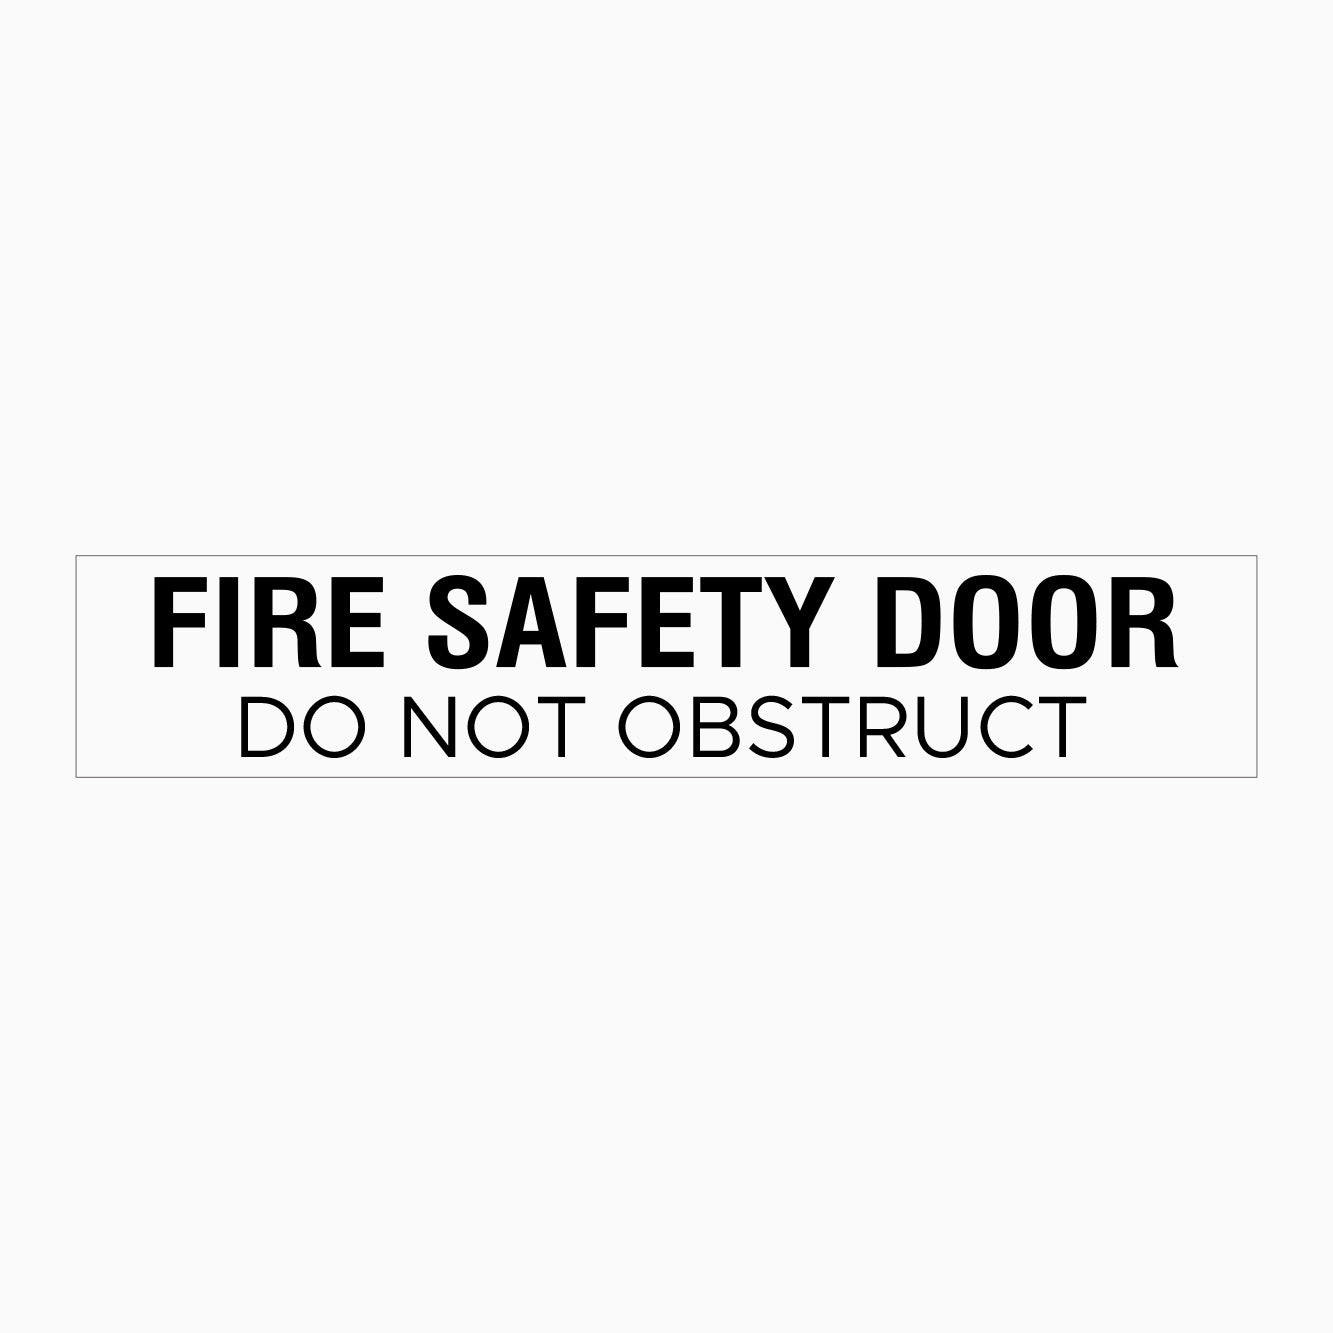 FIRE SAFETY DOOR  SIGN - DO NOT OBSTRUCT SIGN